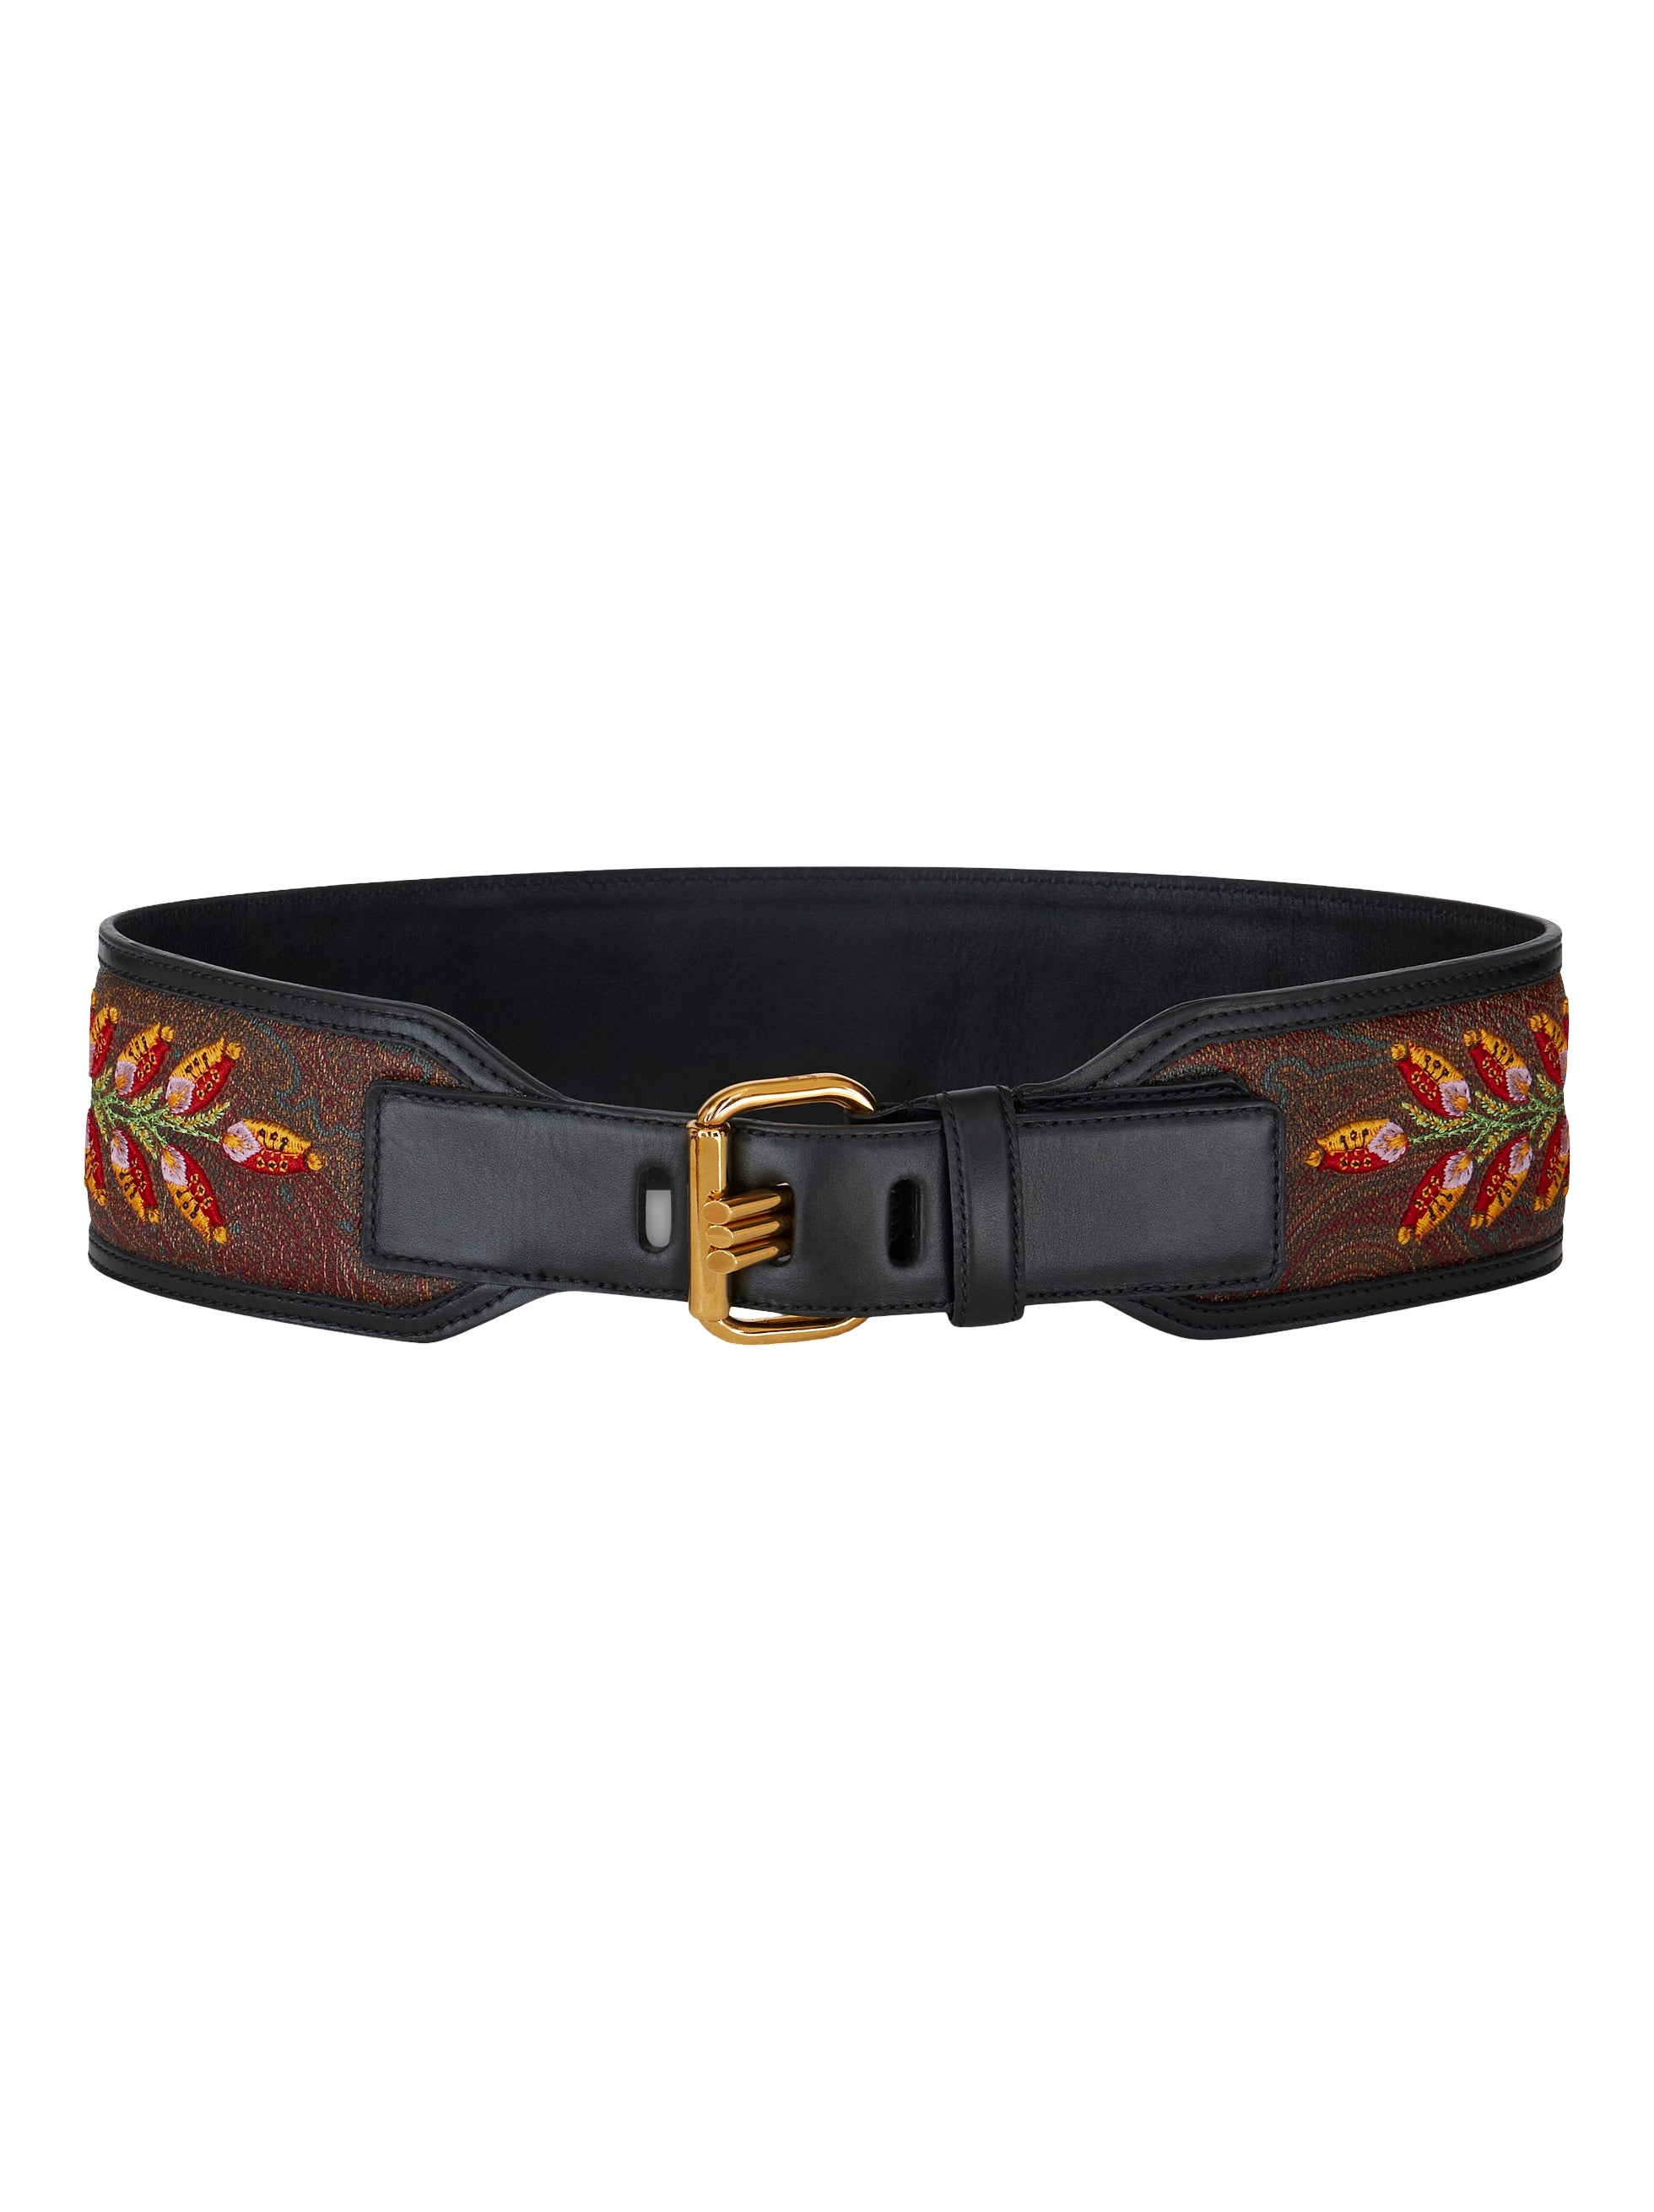 LEATHER BELT WITH EMBROIDERY